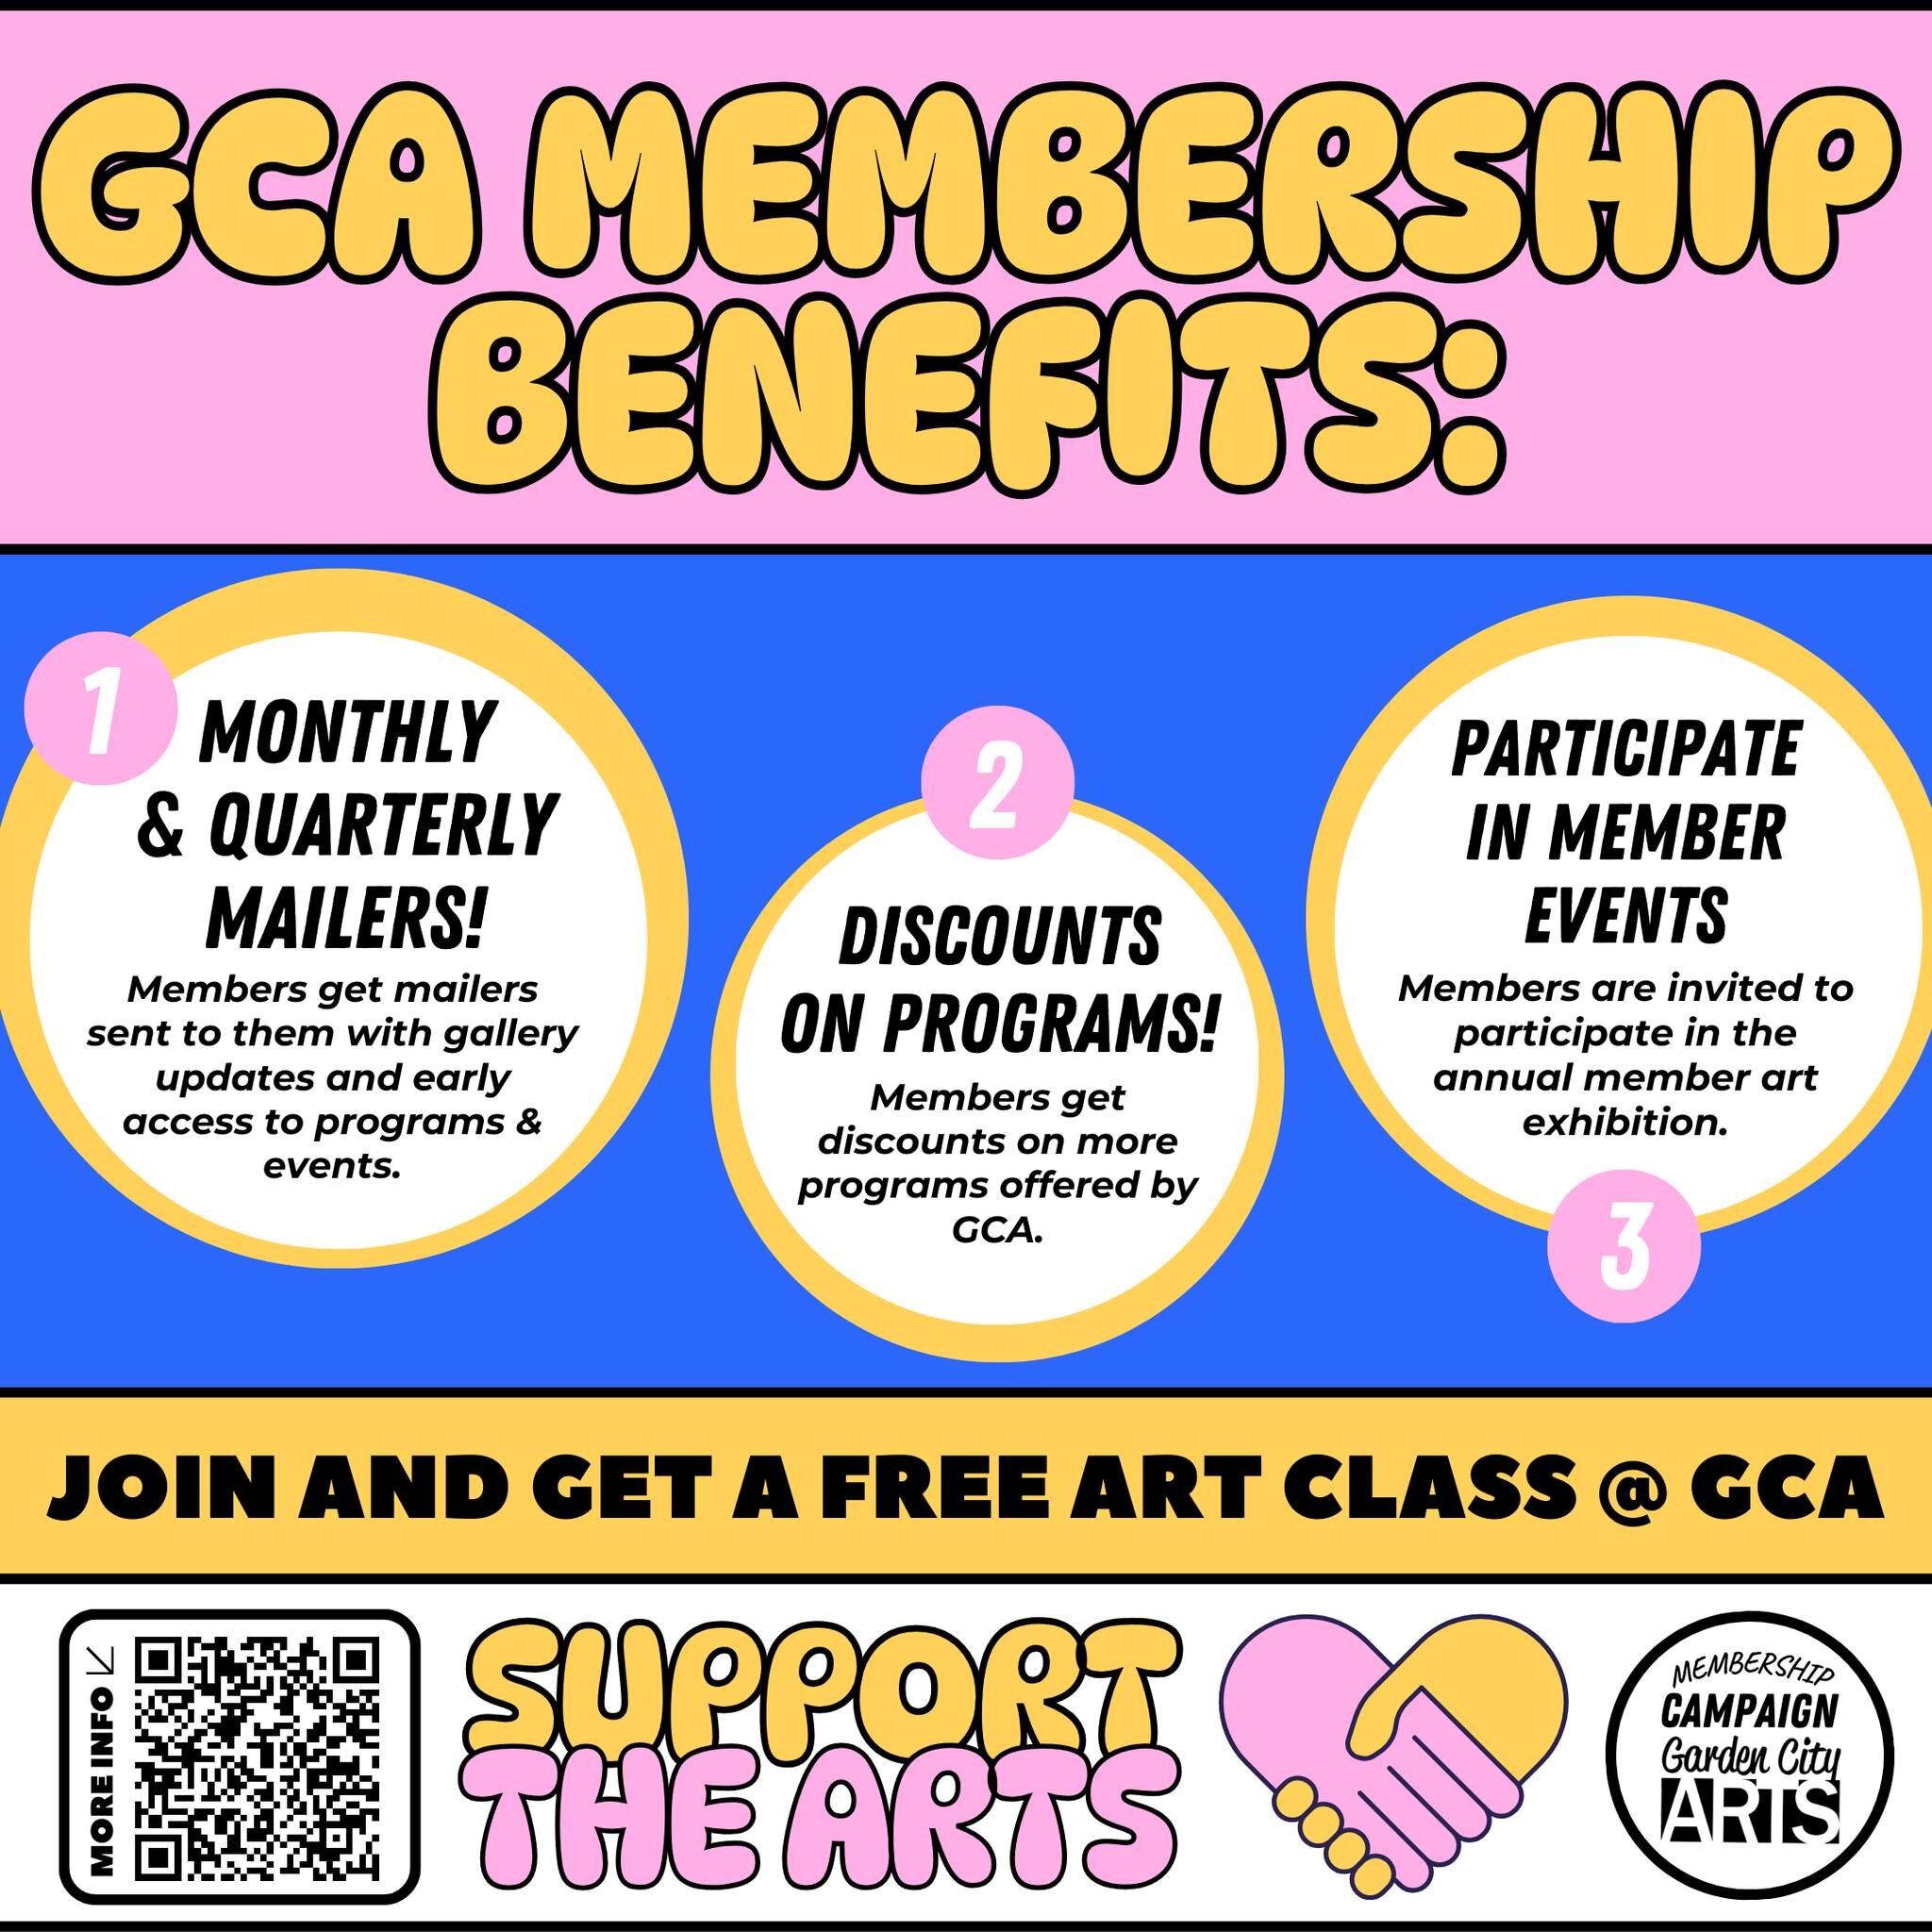 Supporting Garden City Arts not only benefits our community, BUT has several personal benefits. If you donate before April 30th during our Spring Membership Campaign, you'll get the extra perk of a free class. Donate today here: https://gardencityart